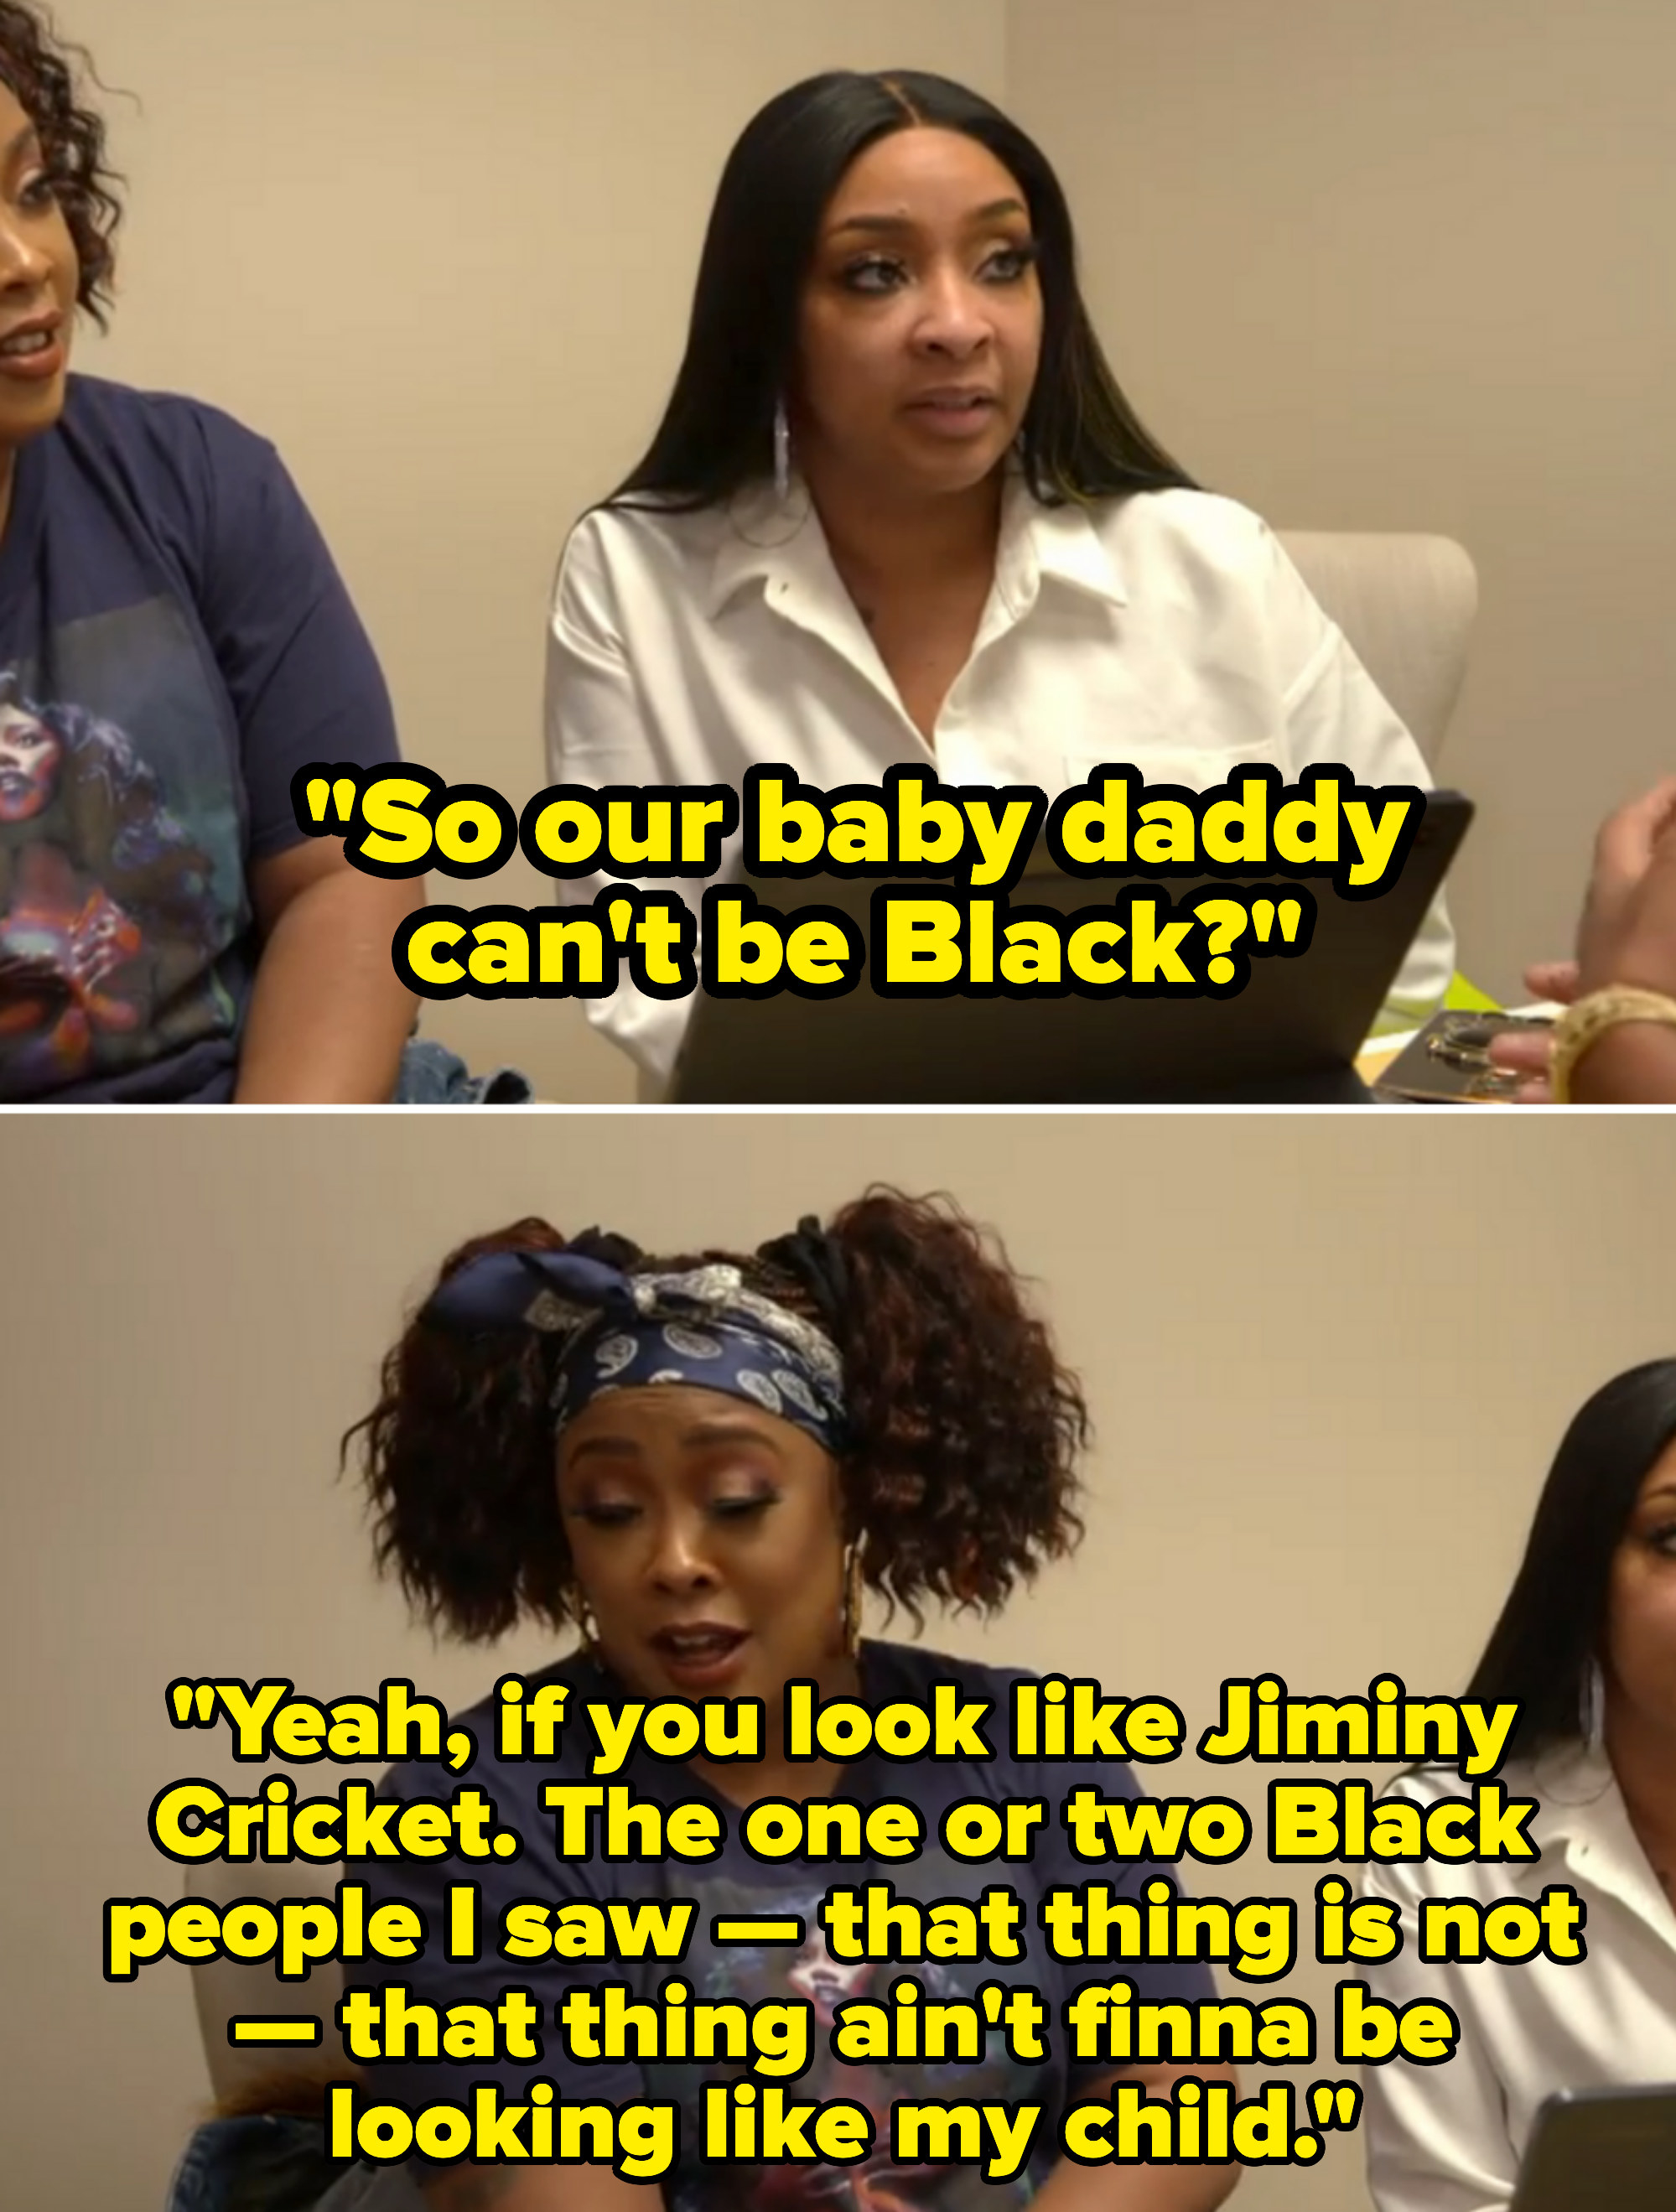 After Judy asks, &quot;So our baby daddy can&#x27;t be Black?&quot; and Da Brat says, &quot;Yeah if you look like Jiminy Cricket. The one or two Black people I saw, that thing is not, that thing ain&#x27;t finna be looking like my child&quot;